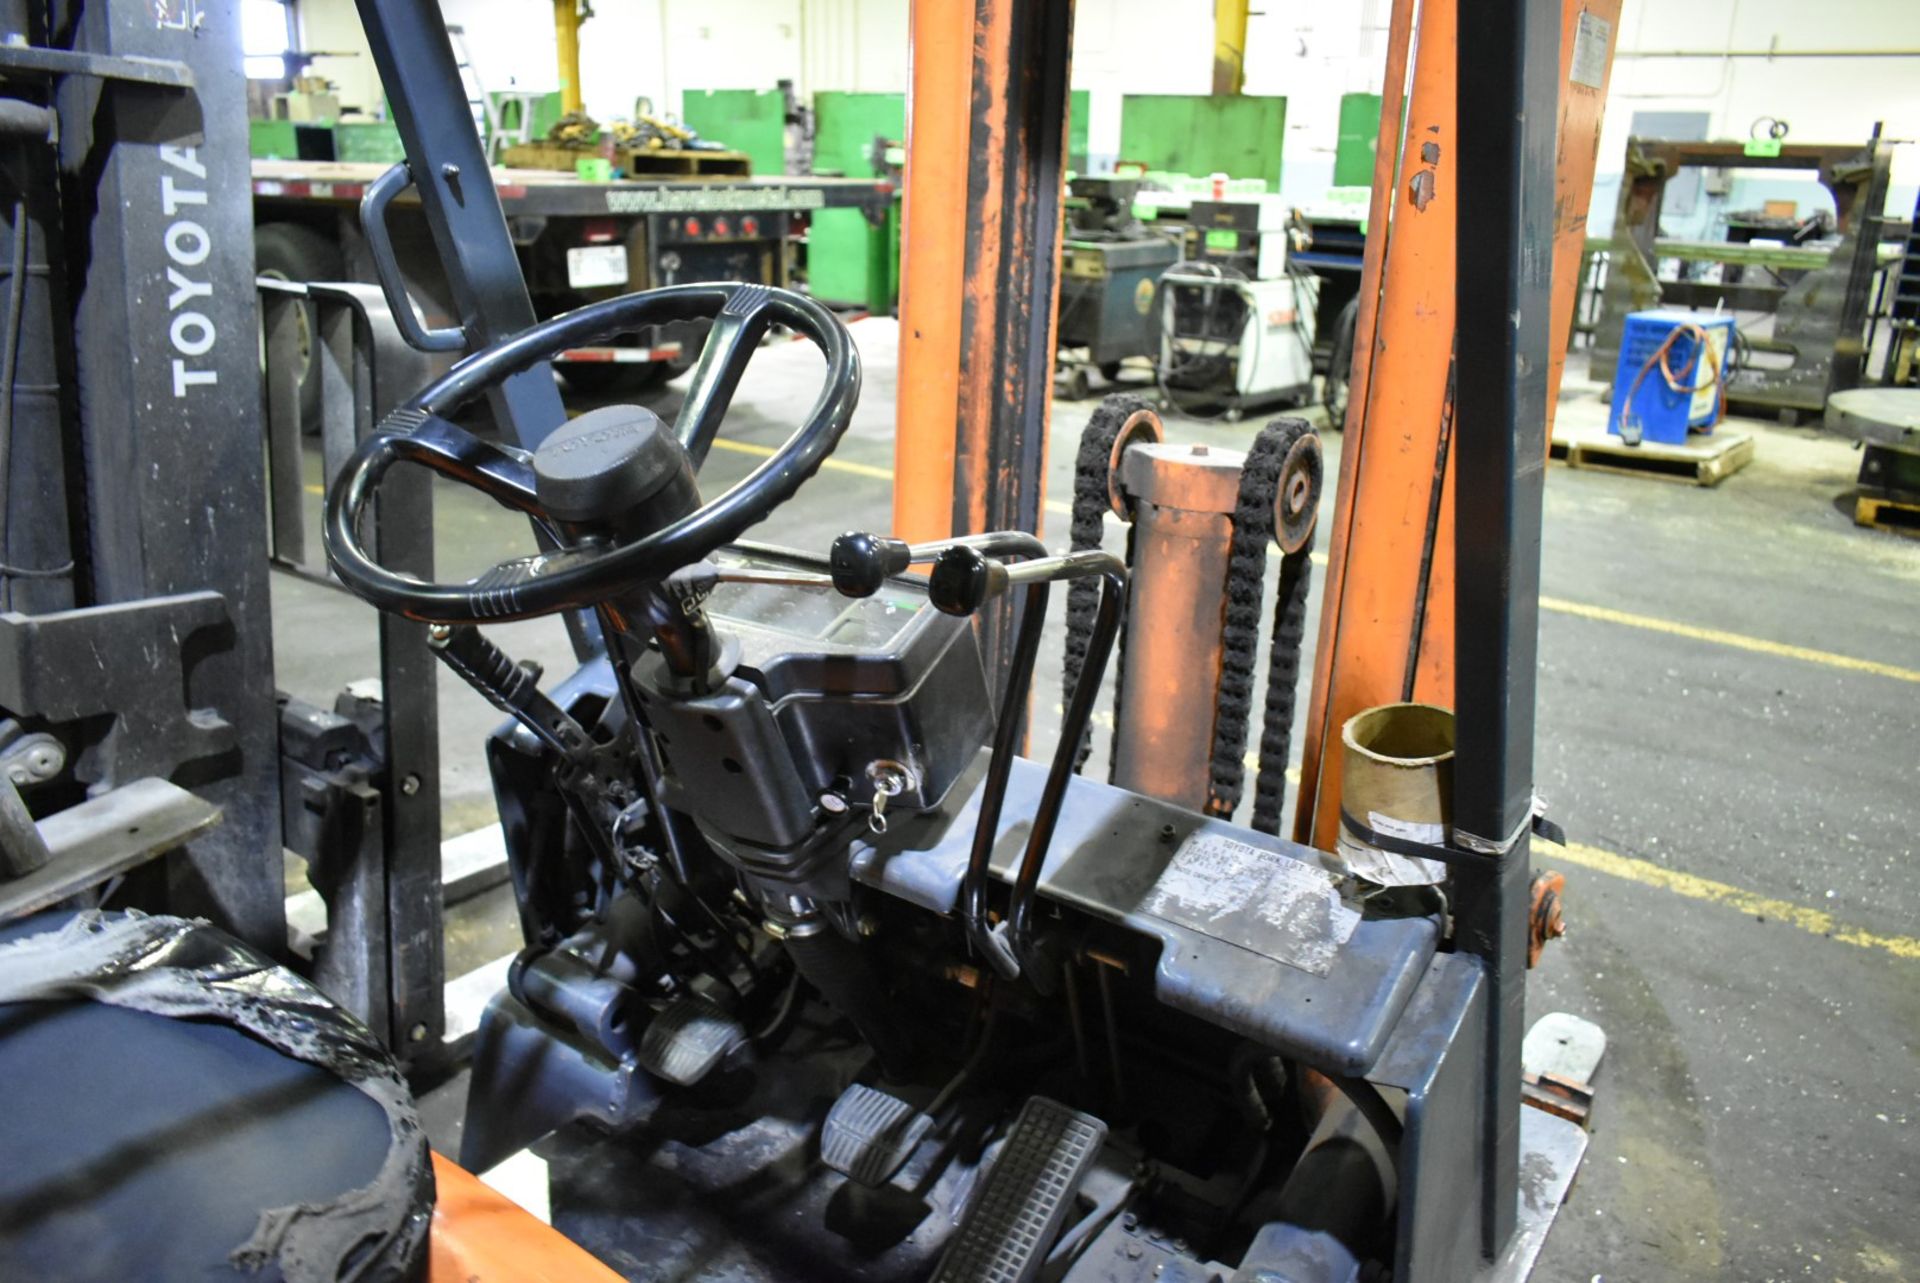 TOYOTA 5FGC25 LPG FORKLIFT WITH 4700LBS MAX CAPACITY, 188" 2-STAGE HIGH VISIBILITY MAST, CUSHION - Image 6 of 8